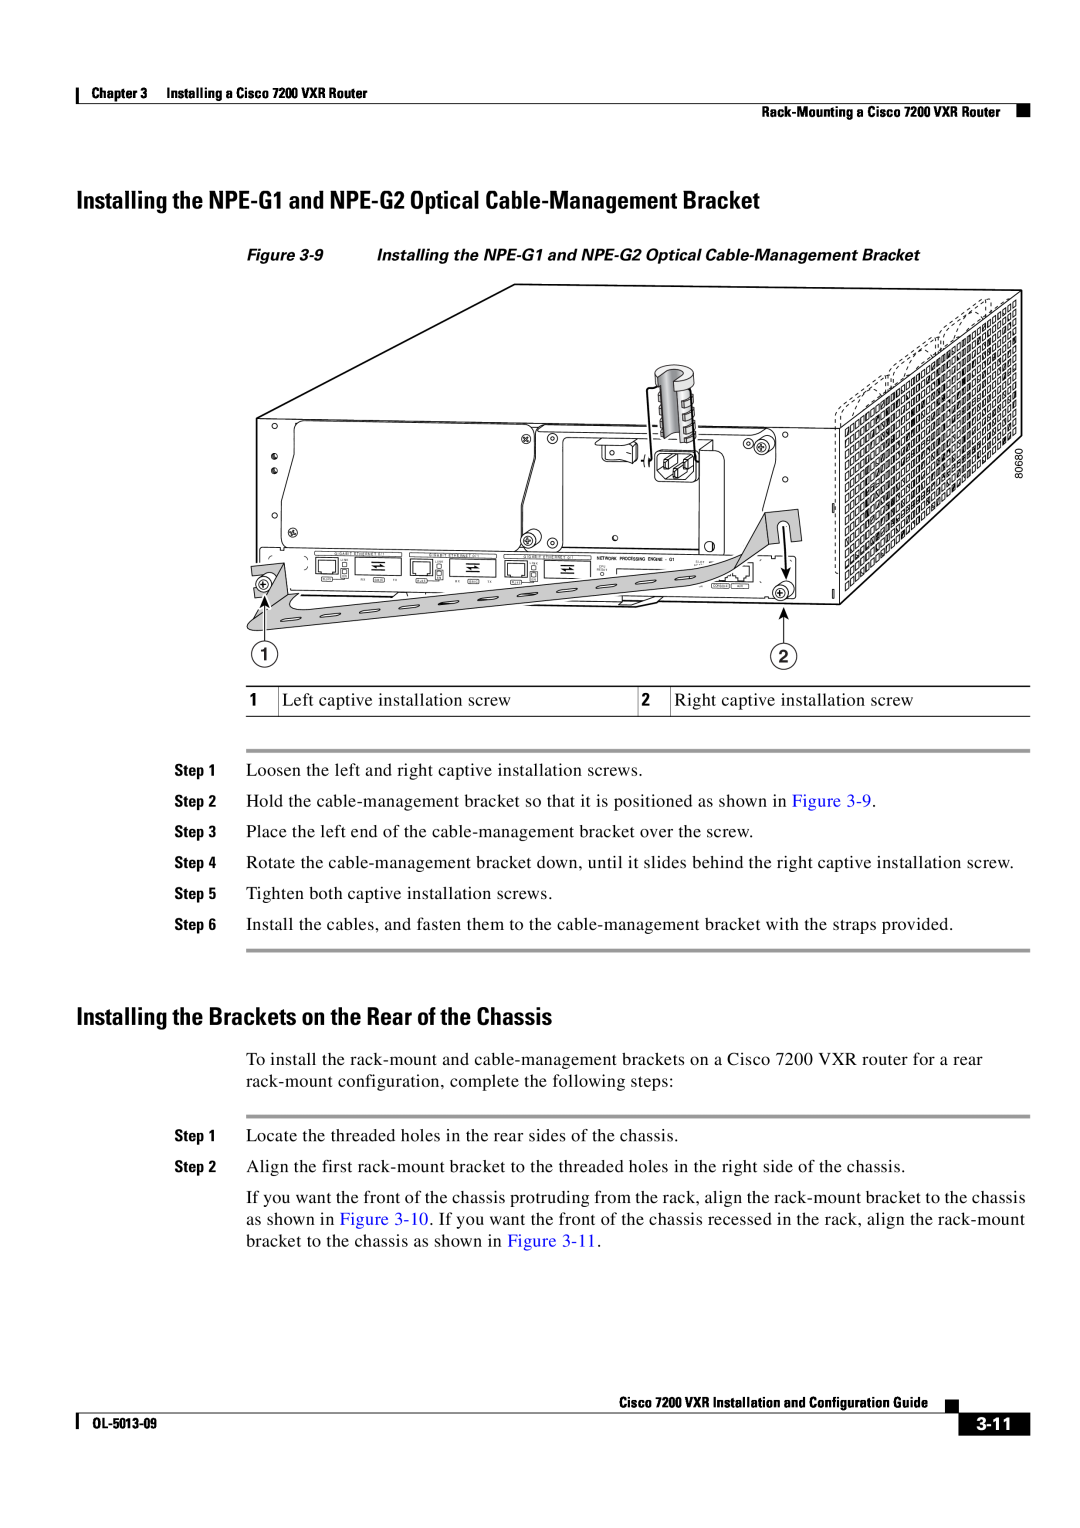 Cisco Systems 7200 VXR manual Installing the NPE-G1 and NPE-G2 Optical Cable-Management Bracket, 3-11 